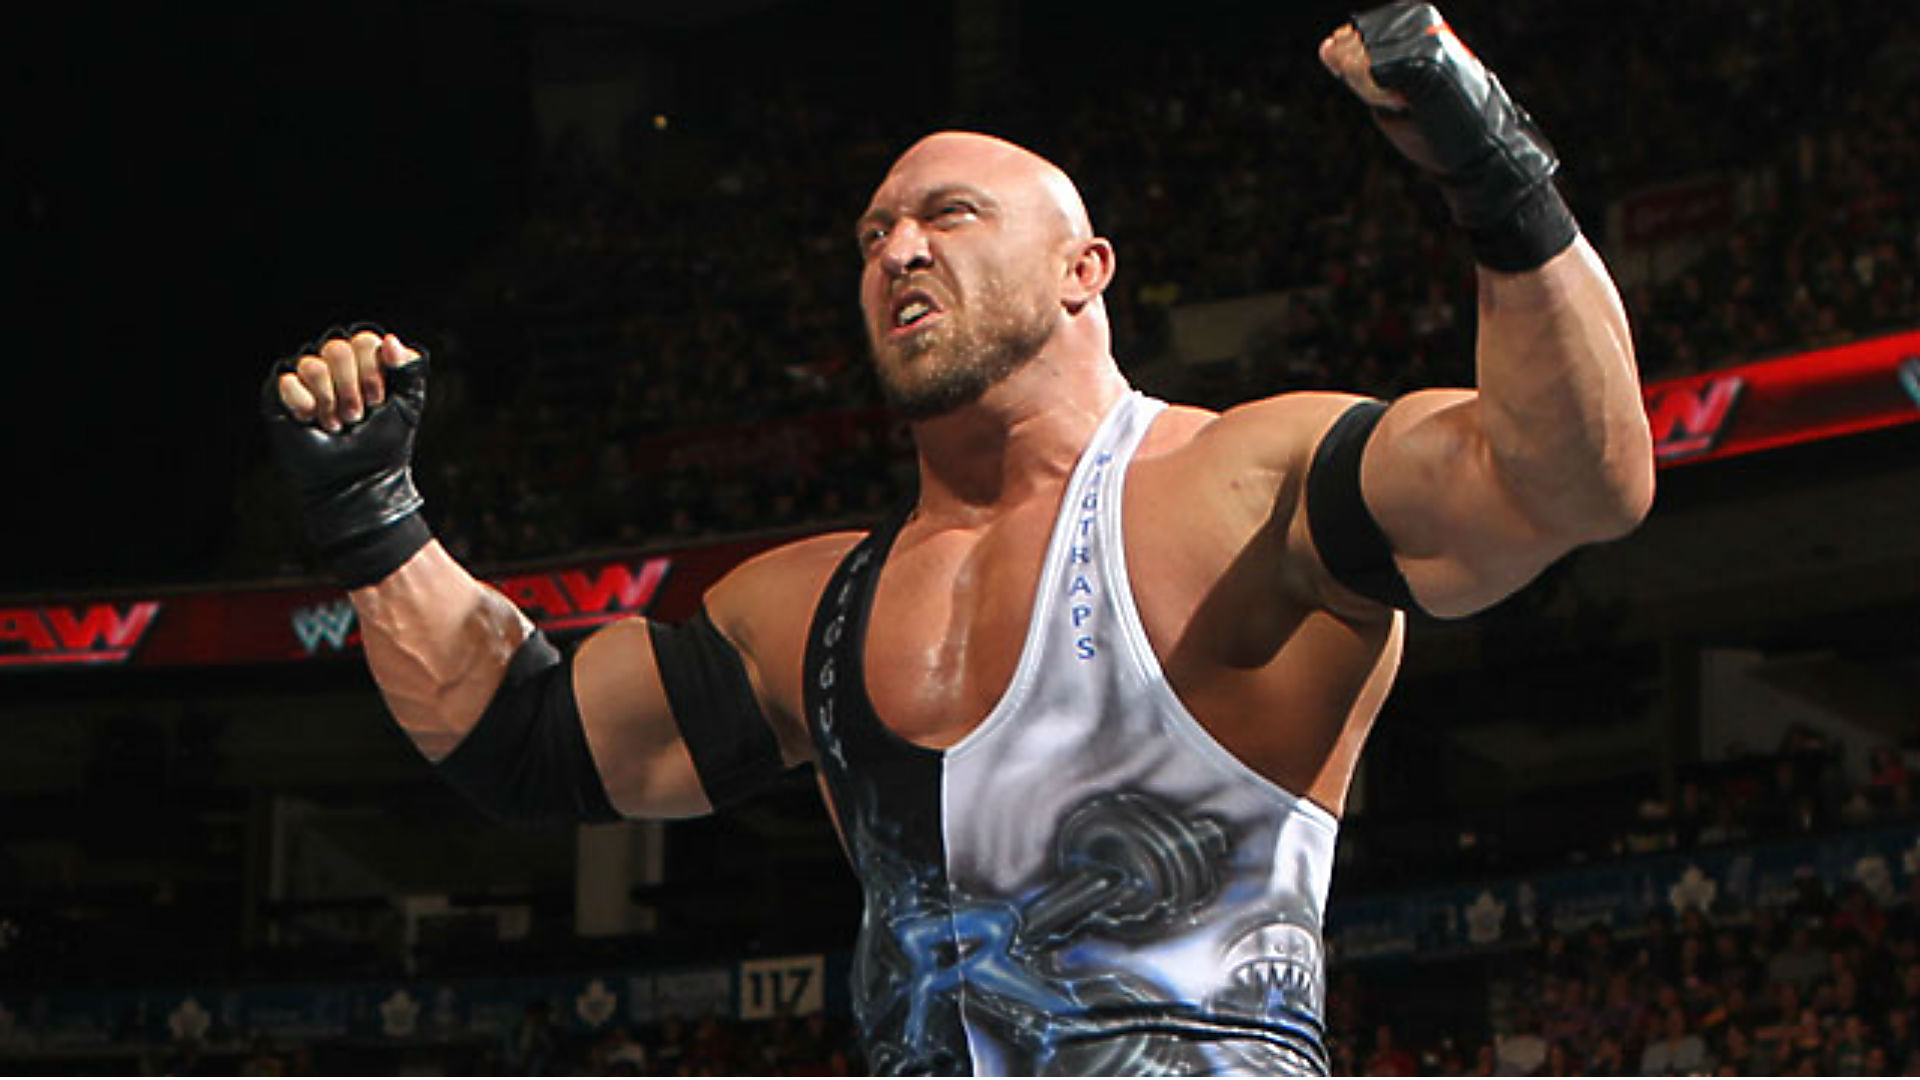 HD Quality Wallpaper | Collection: Men, 1920x1080 Ryback